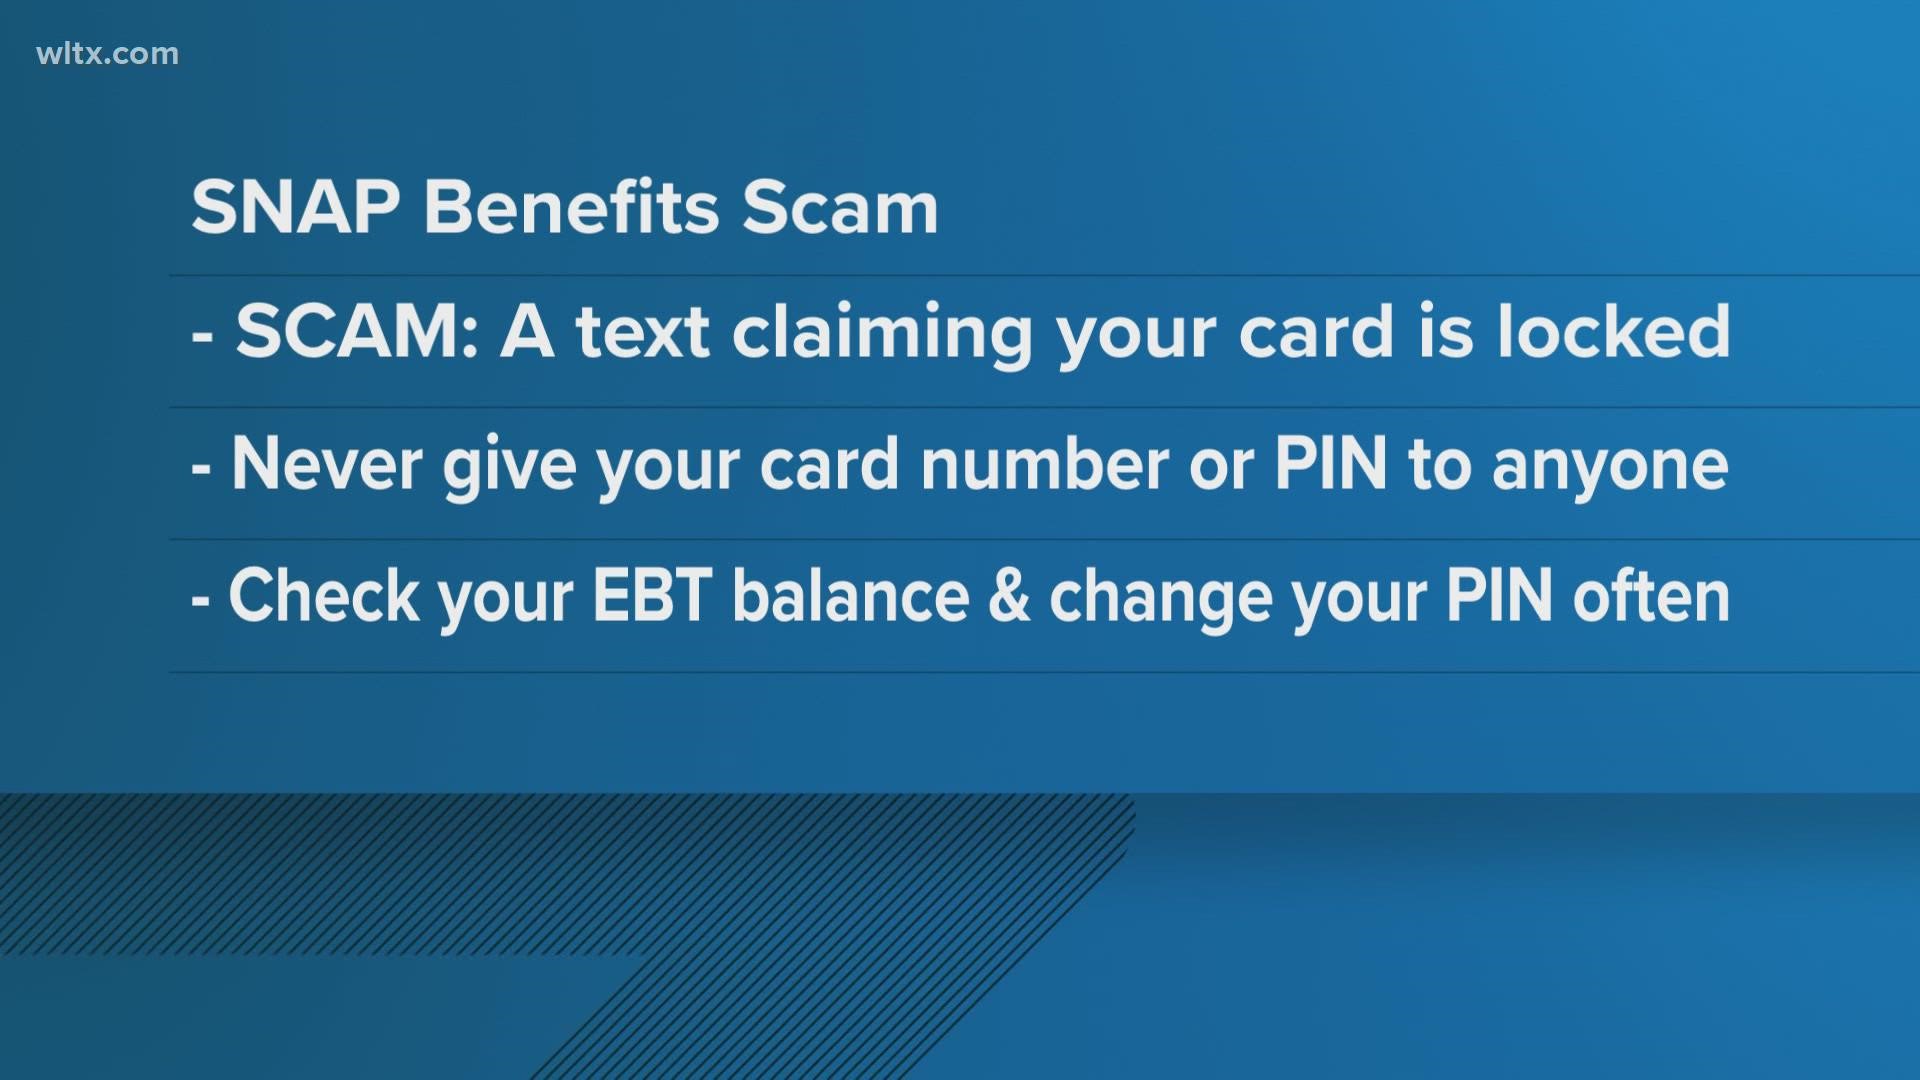 A texting scam is targeting those with SNAP benefits.  Understand the department will never text you.